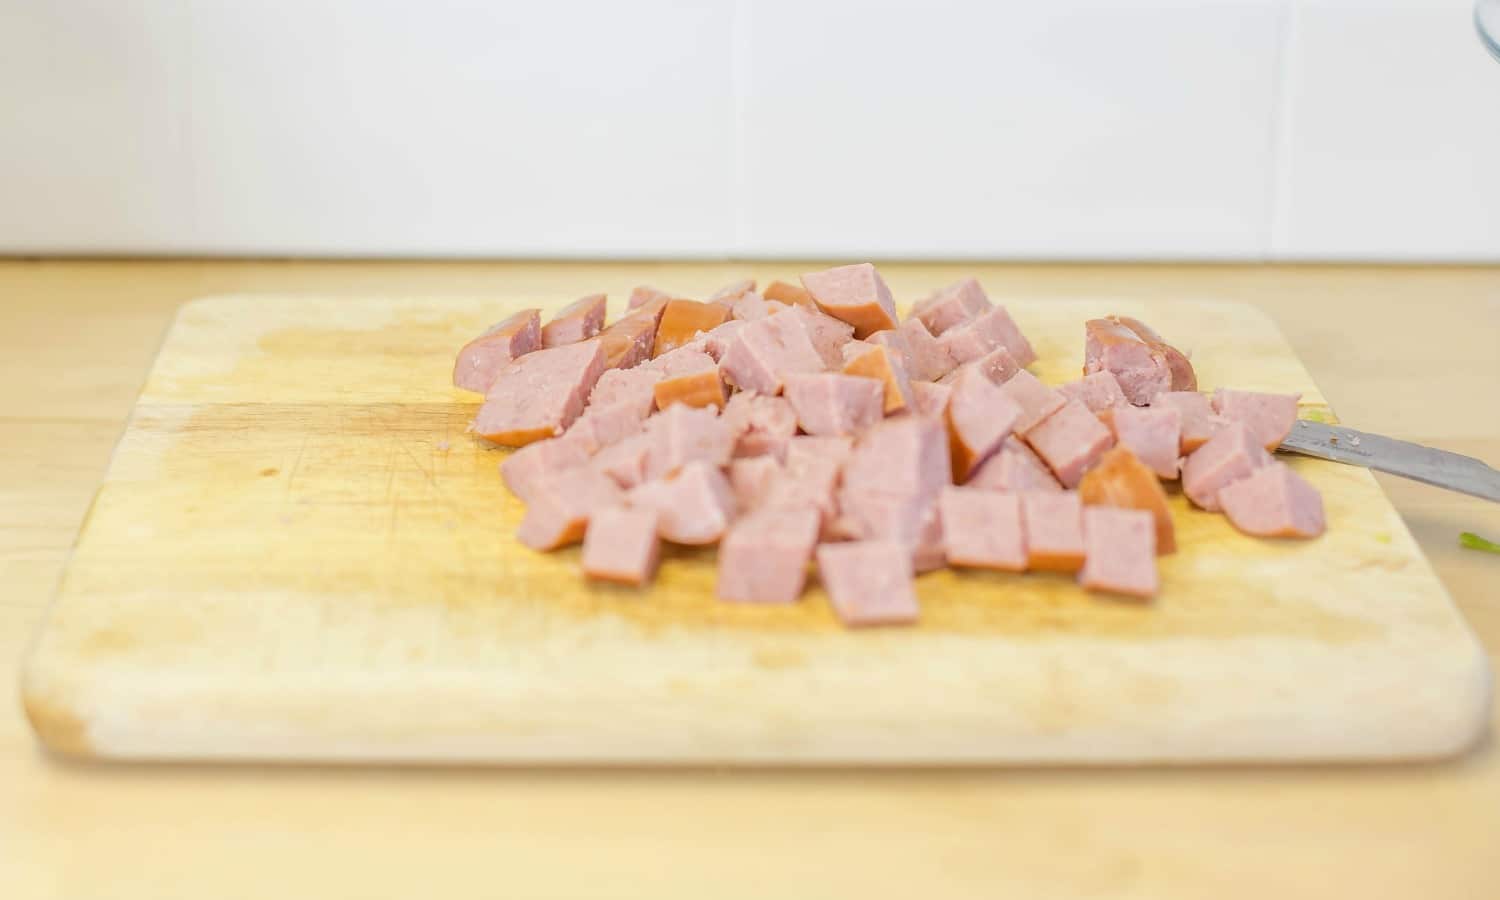 Slice the sausage into small, bite-sized pieces to add flavor to your jambalaya. 